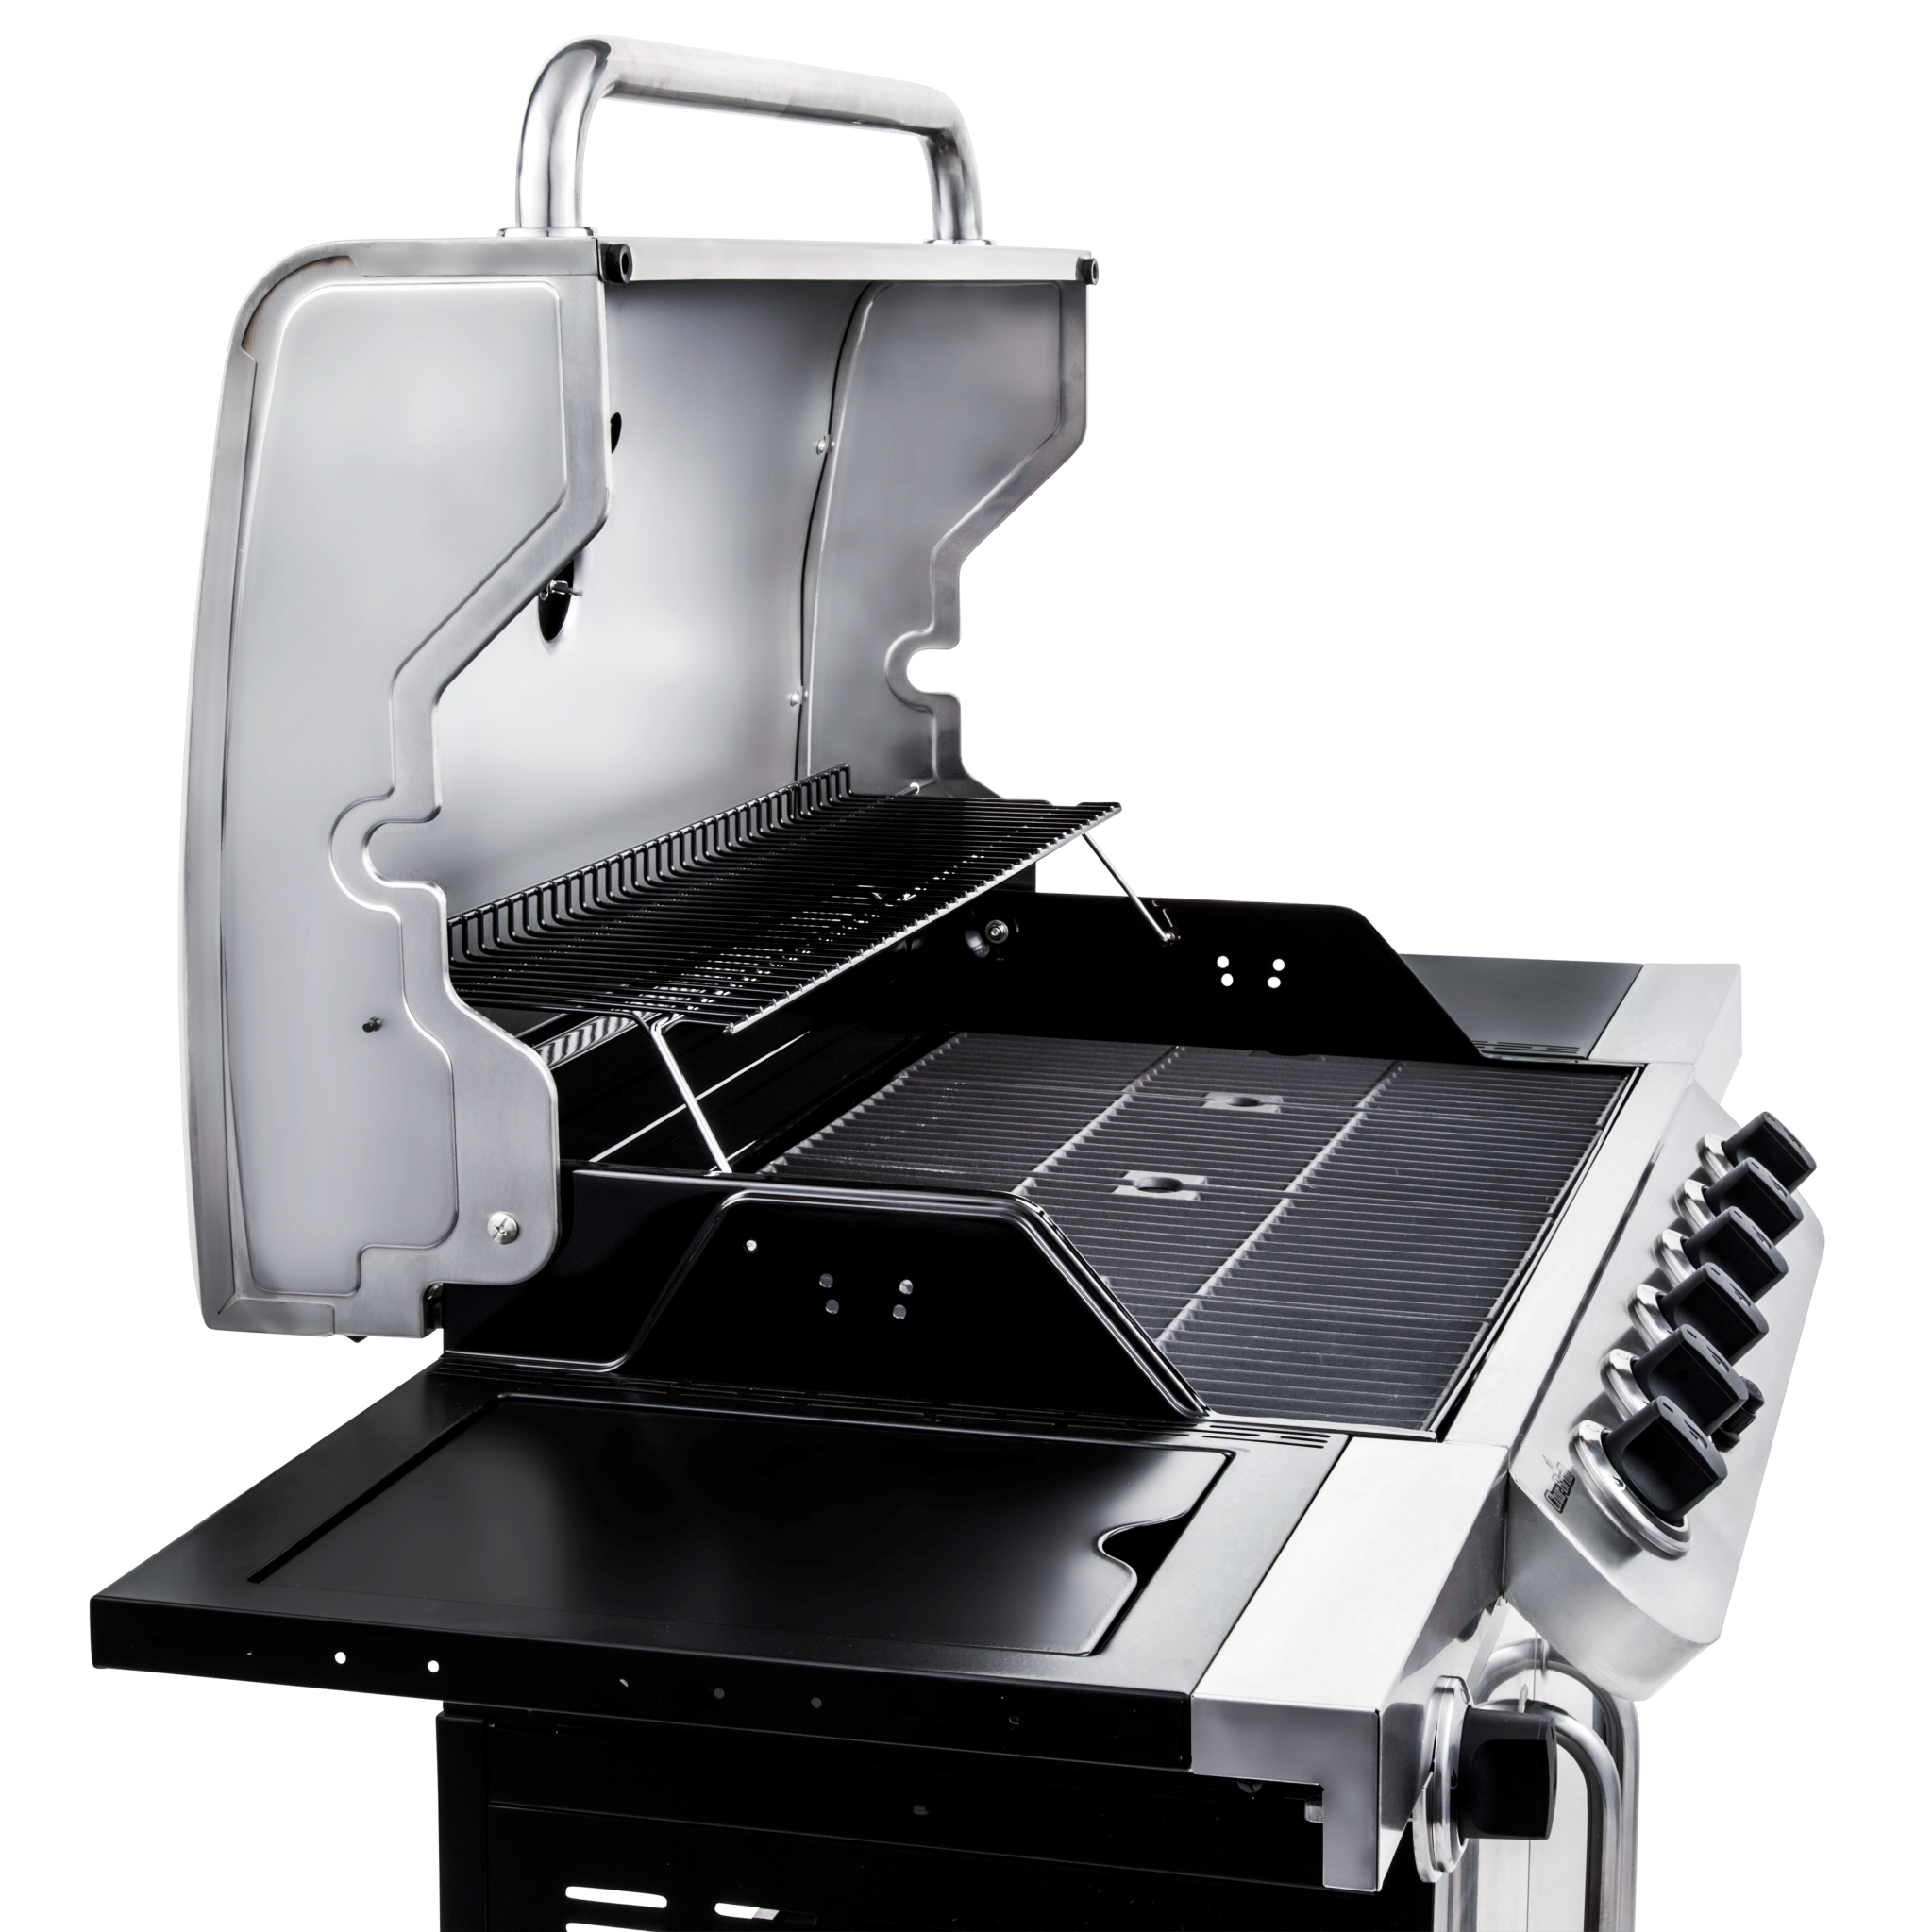 Char-Broil Performance Series 6-burner Liquid Propane Gas Grill with Side Burner, Black & Stainless - image 4 of 11